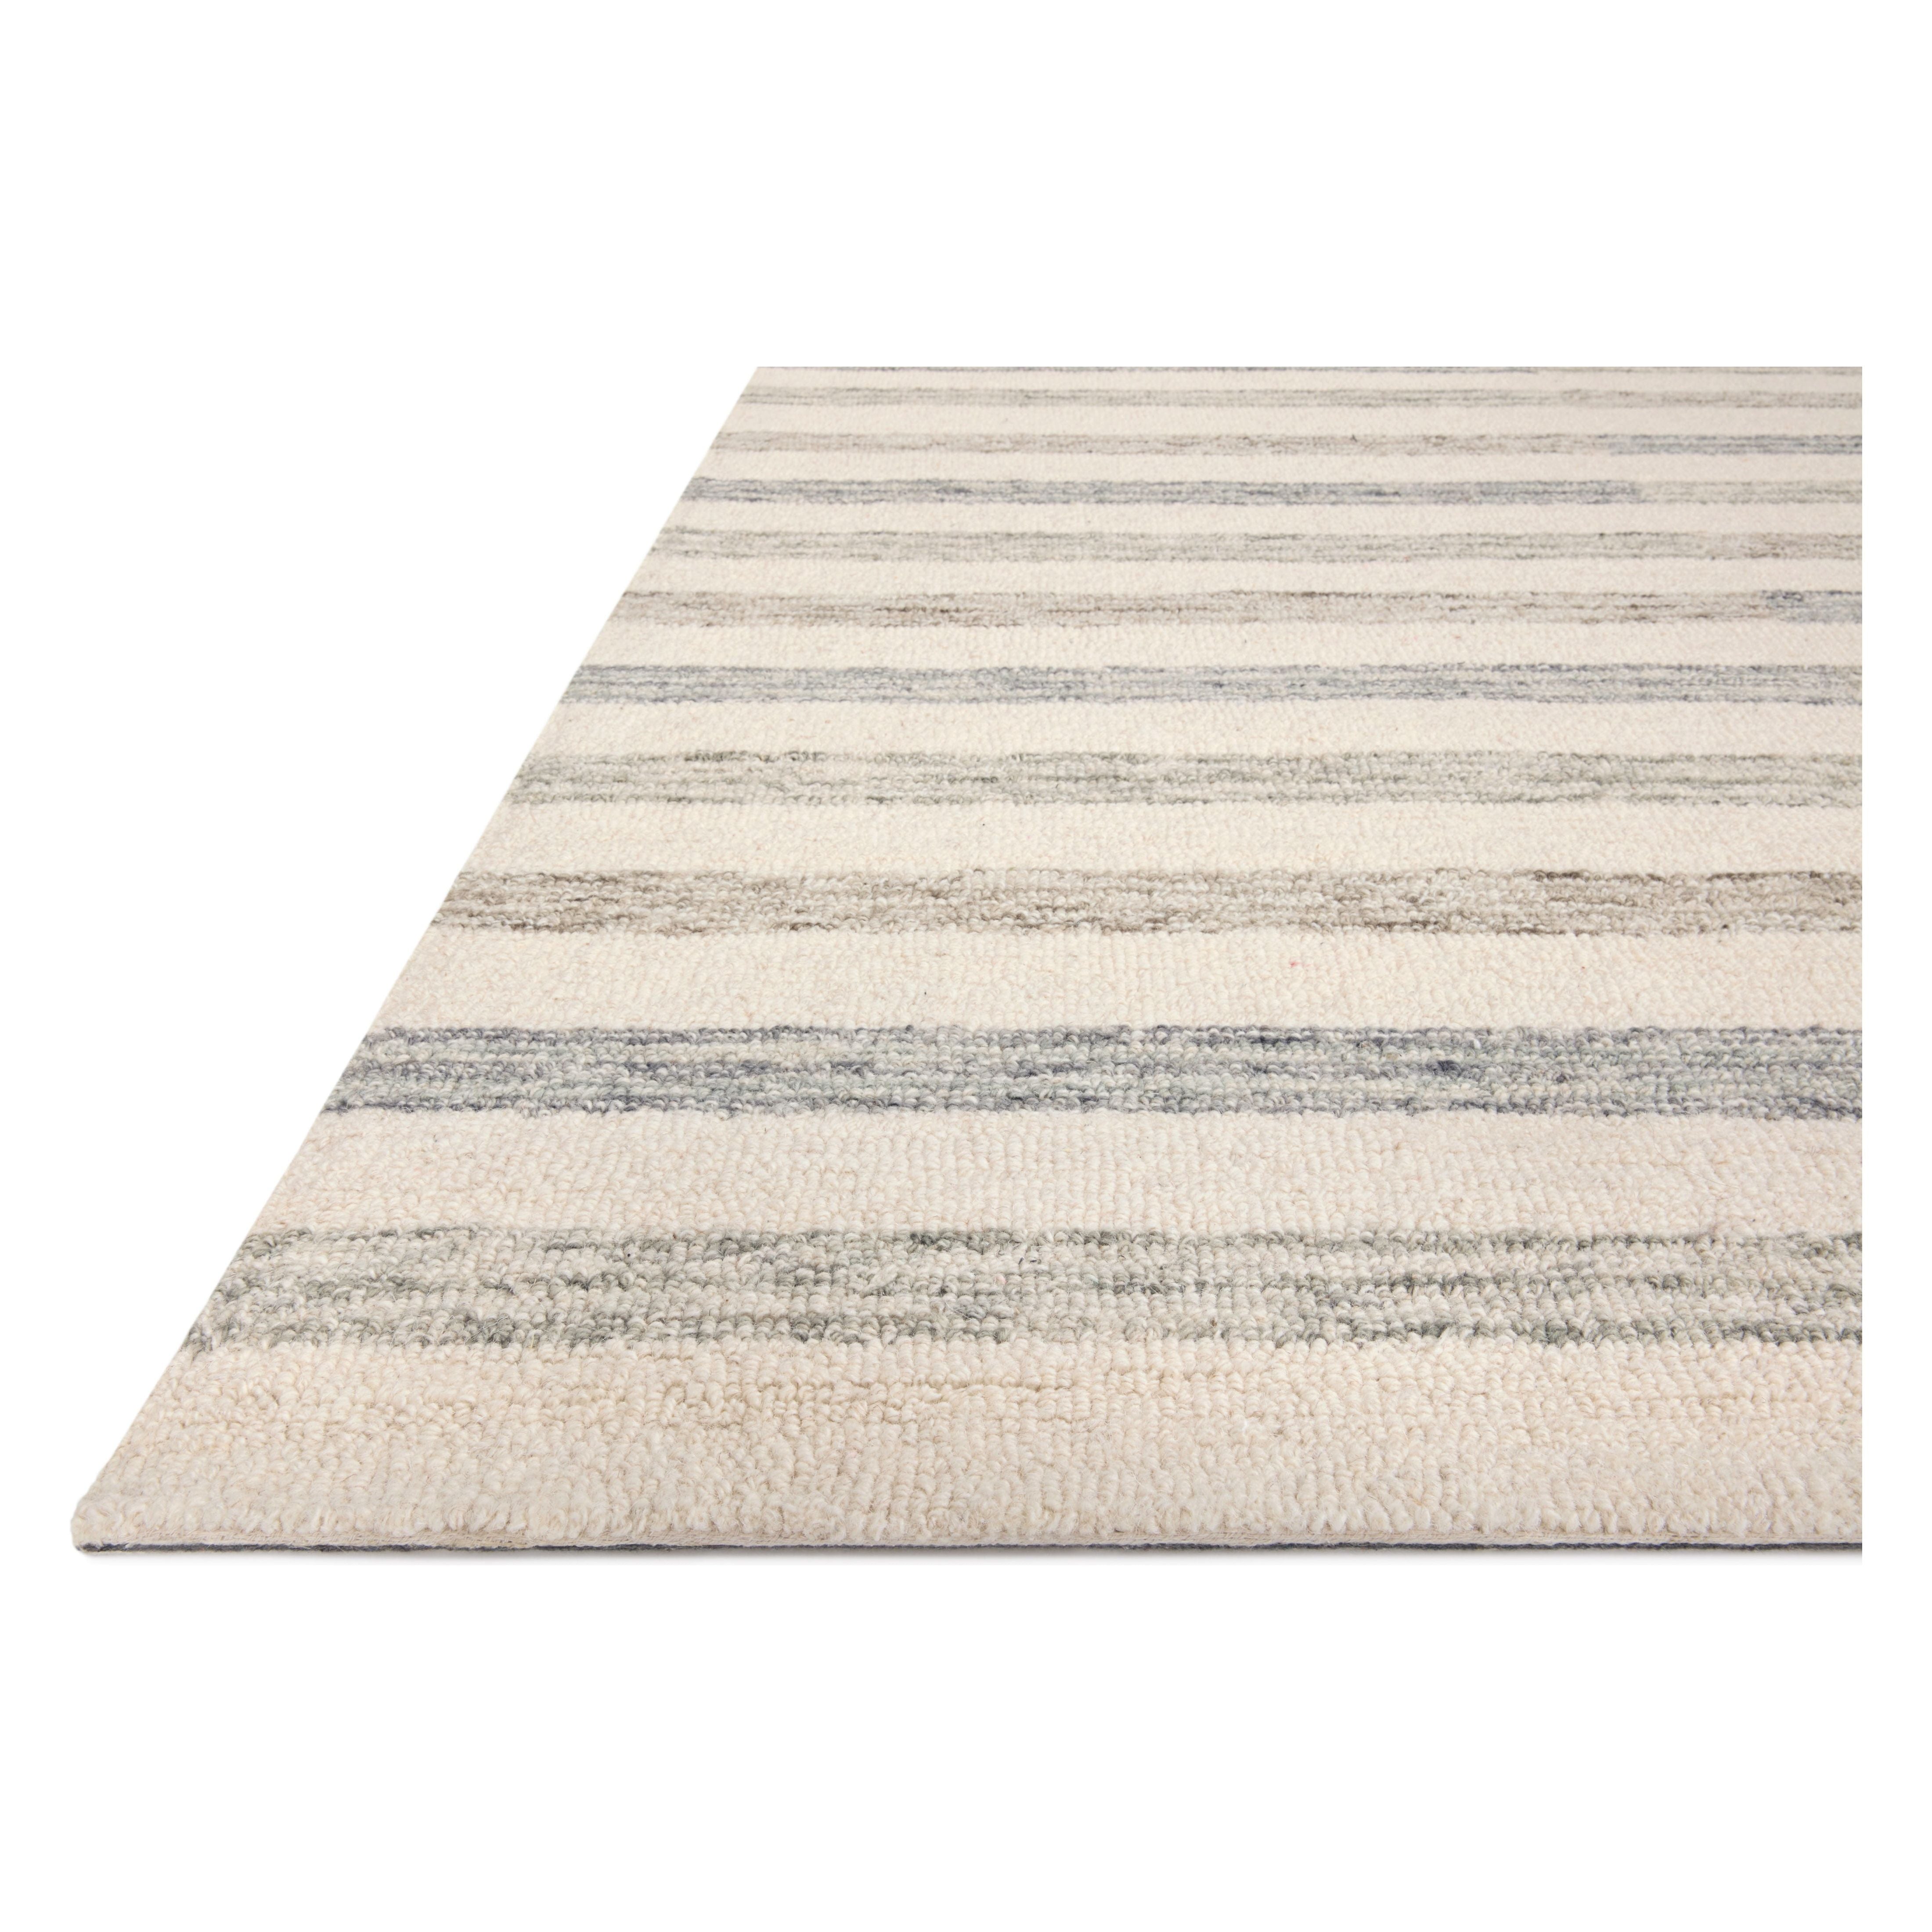 Known for its durability, the Chris Ivory / Slate hooked wool rug is a smart choice for any room in your home that gets lots of love. The subtle, tonal stripes remind us of our favorite California cool hemp rugs. Amethyst Home provides interior design services, furniture, rugs, and lighting in the Seattle metro area.